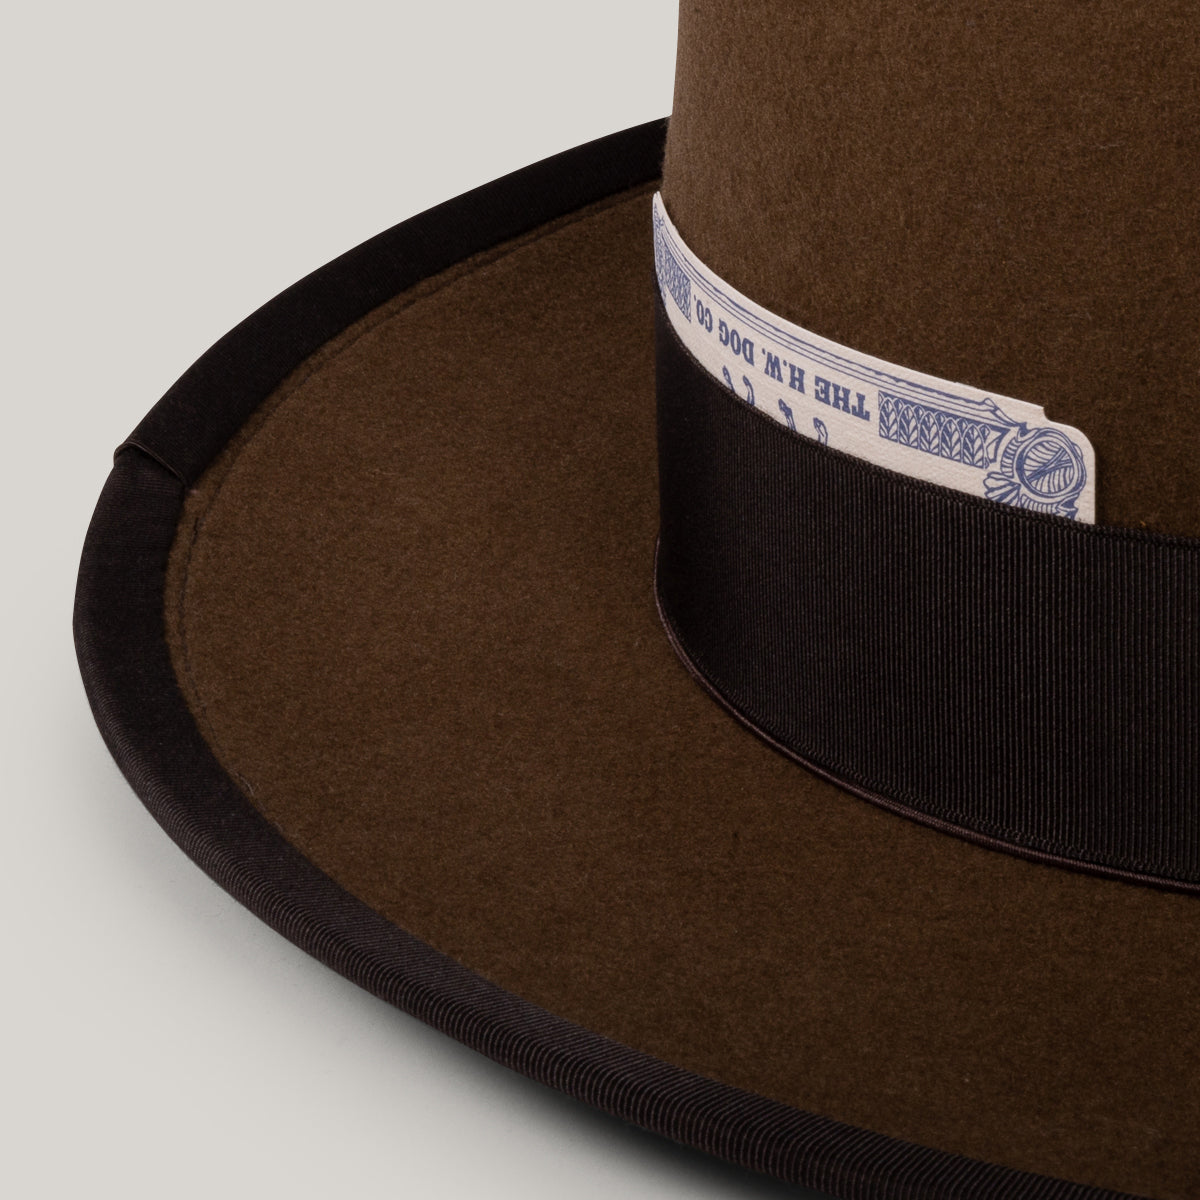 H.W. DOG & CO. POINT-H HAT - BROWN